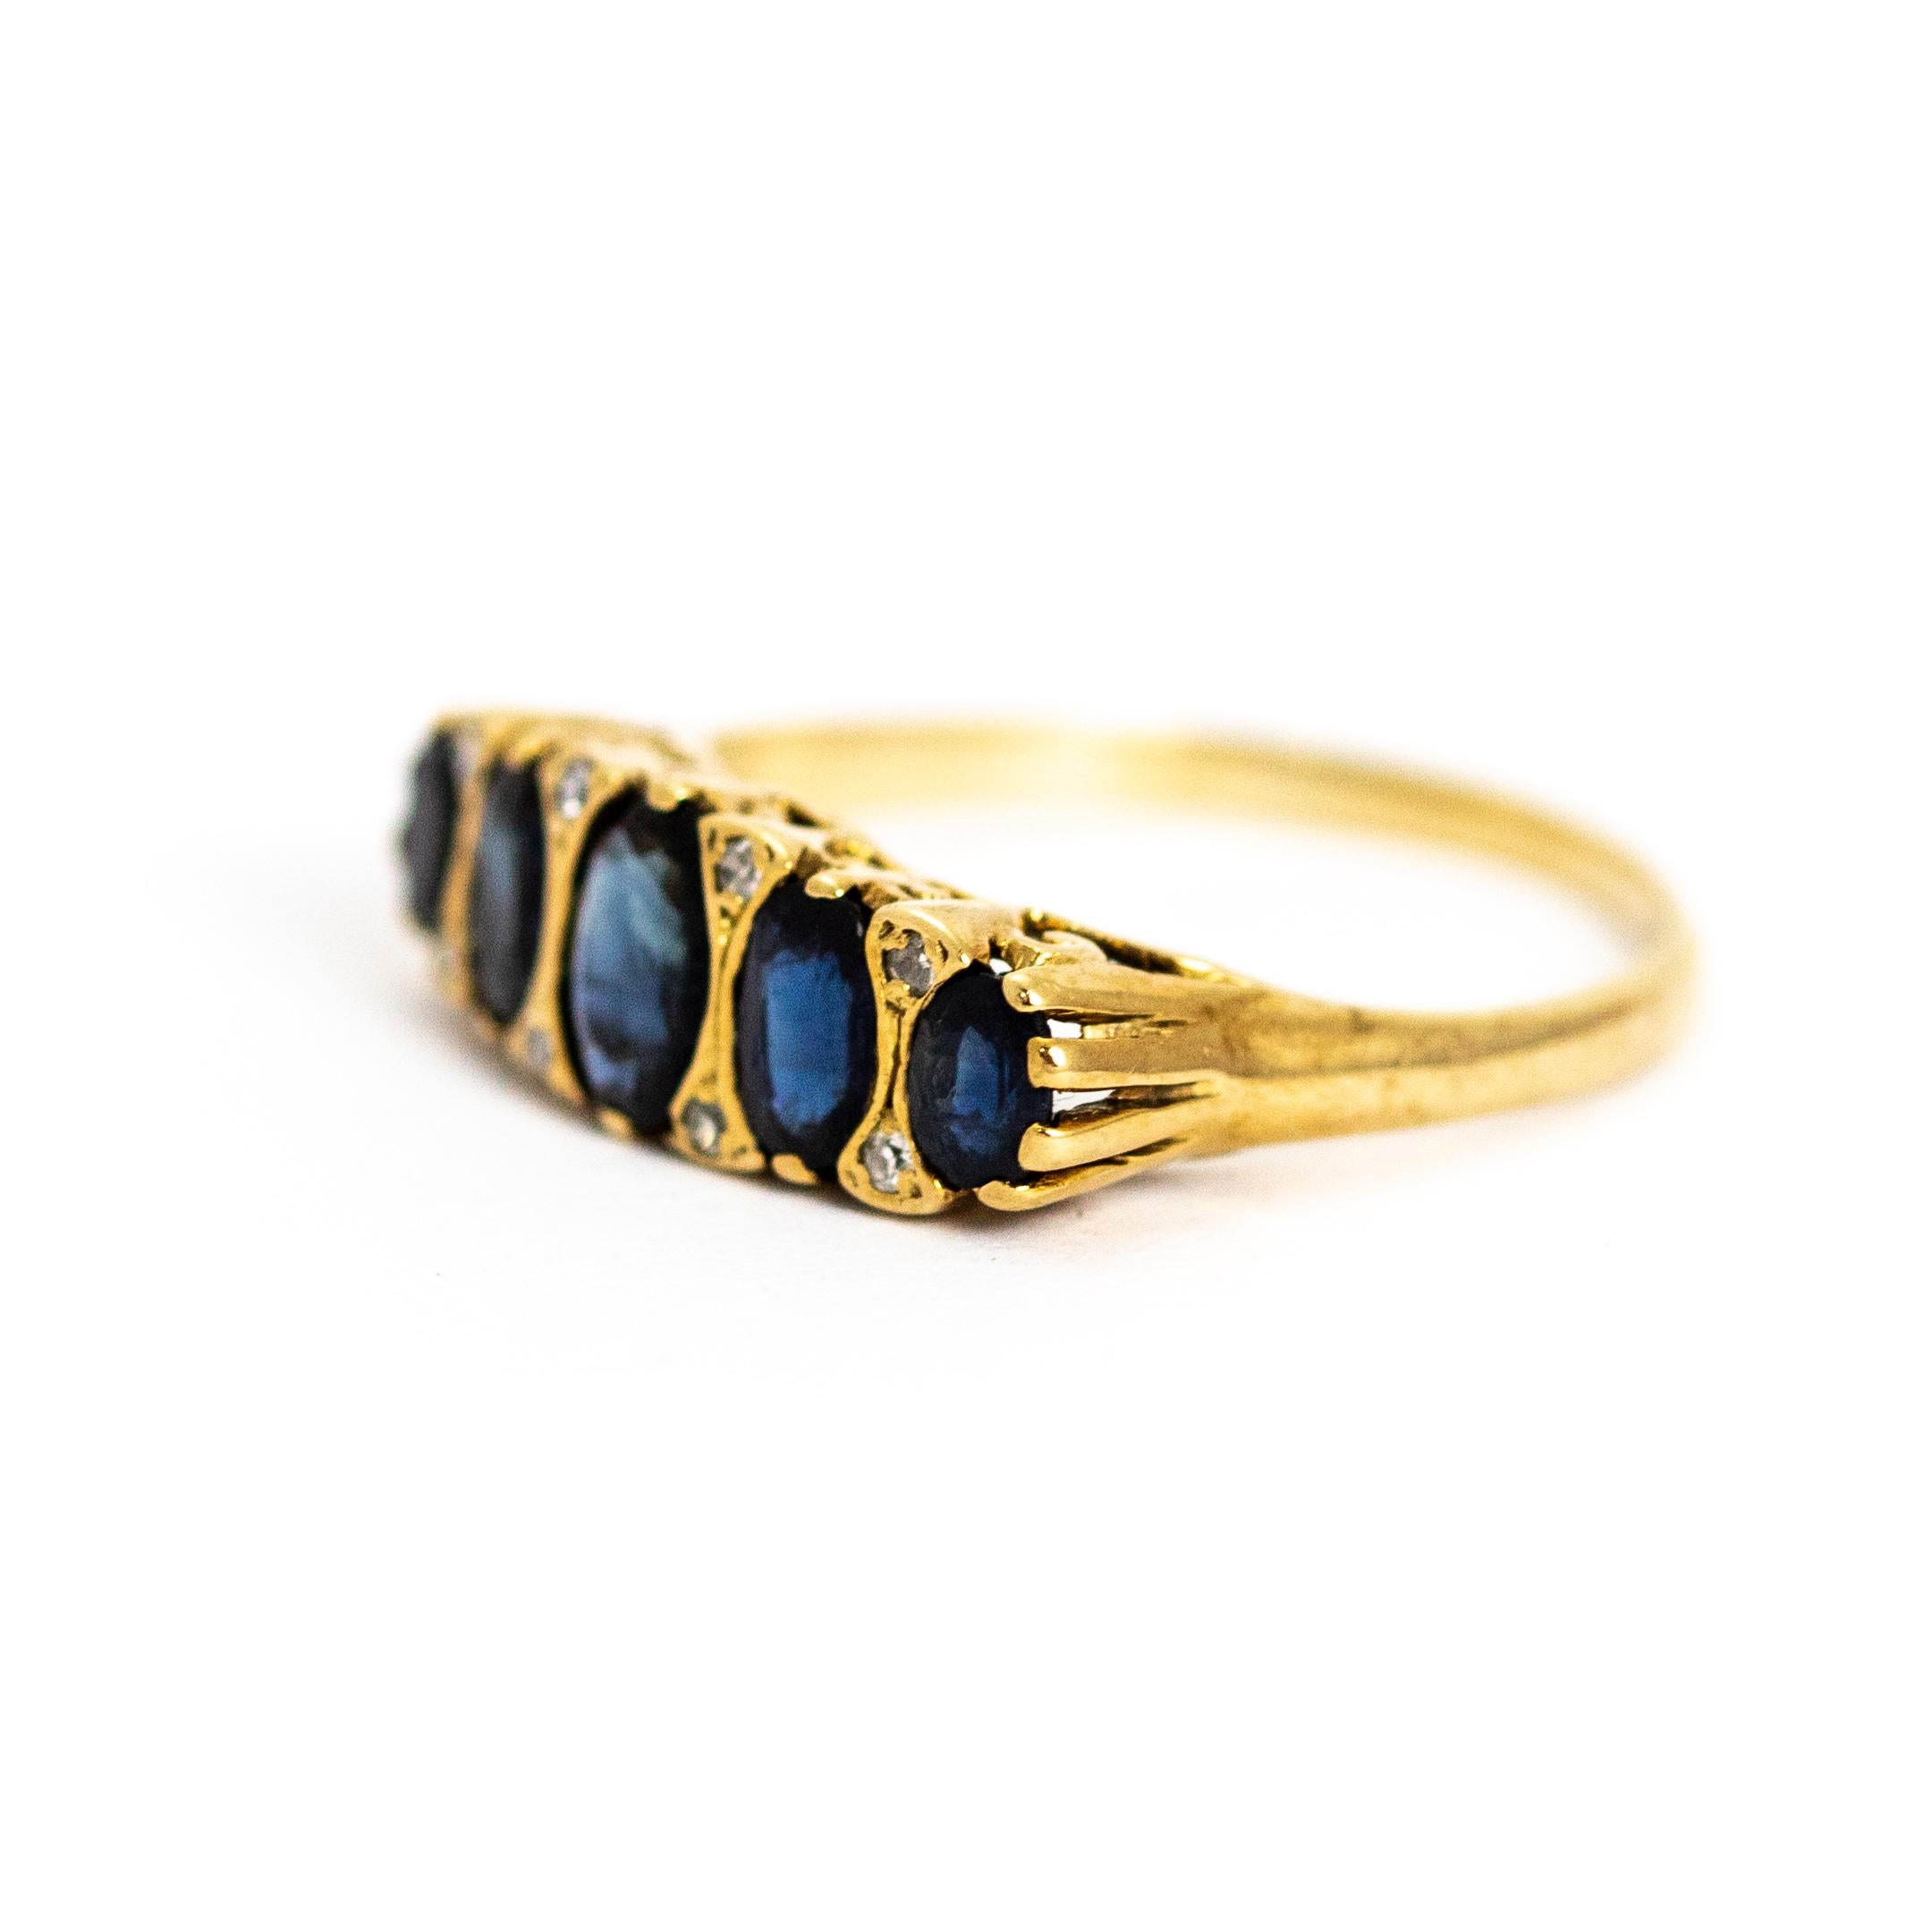 What a stunner! The deep blue sapphires have such a sparkle and the small diamonds in between them make this ring extra sparkly! Five graduated sapphires sit proud with eight diamonds on a decorative 9ct gold setting and band. Made in London